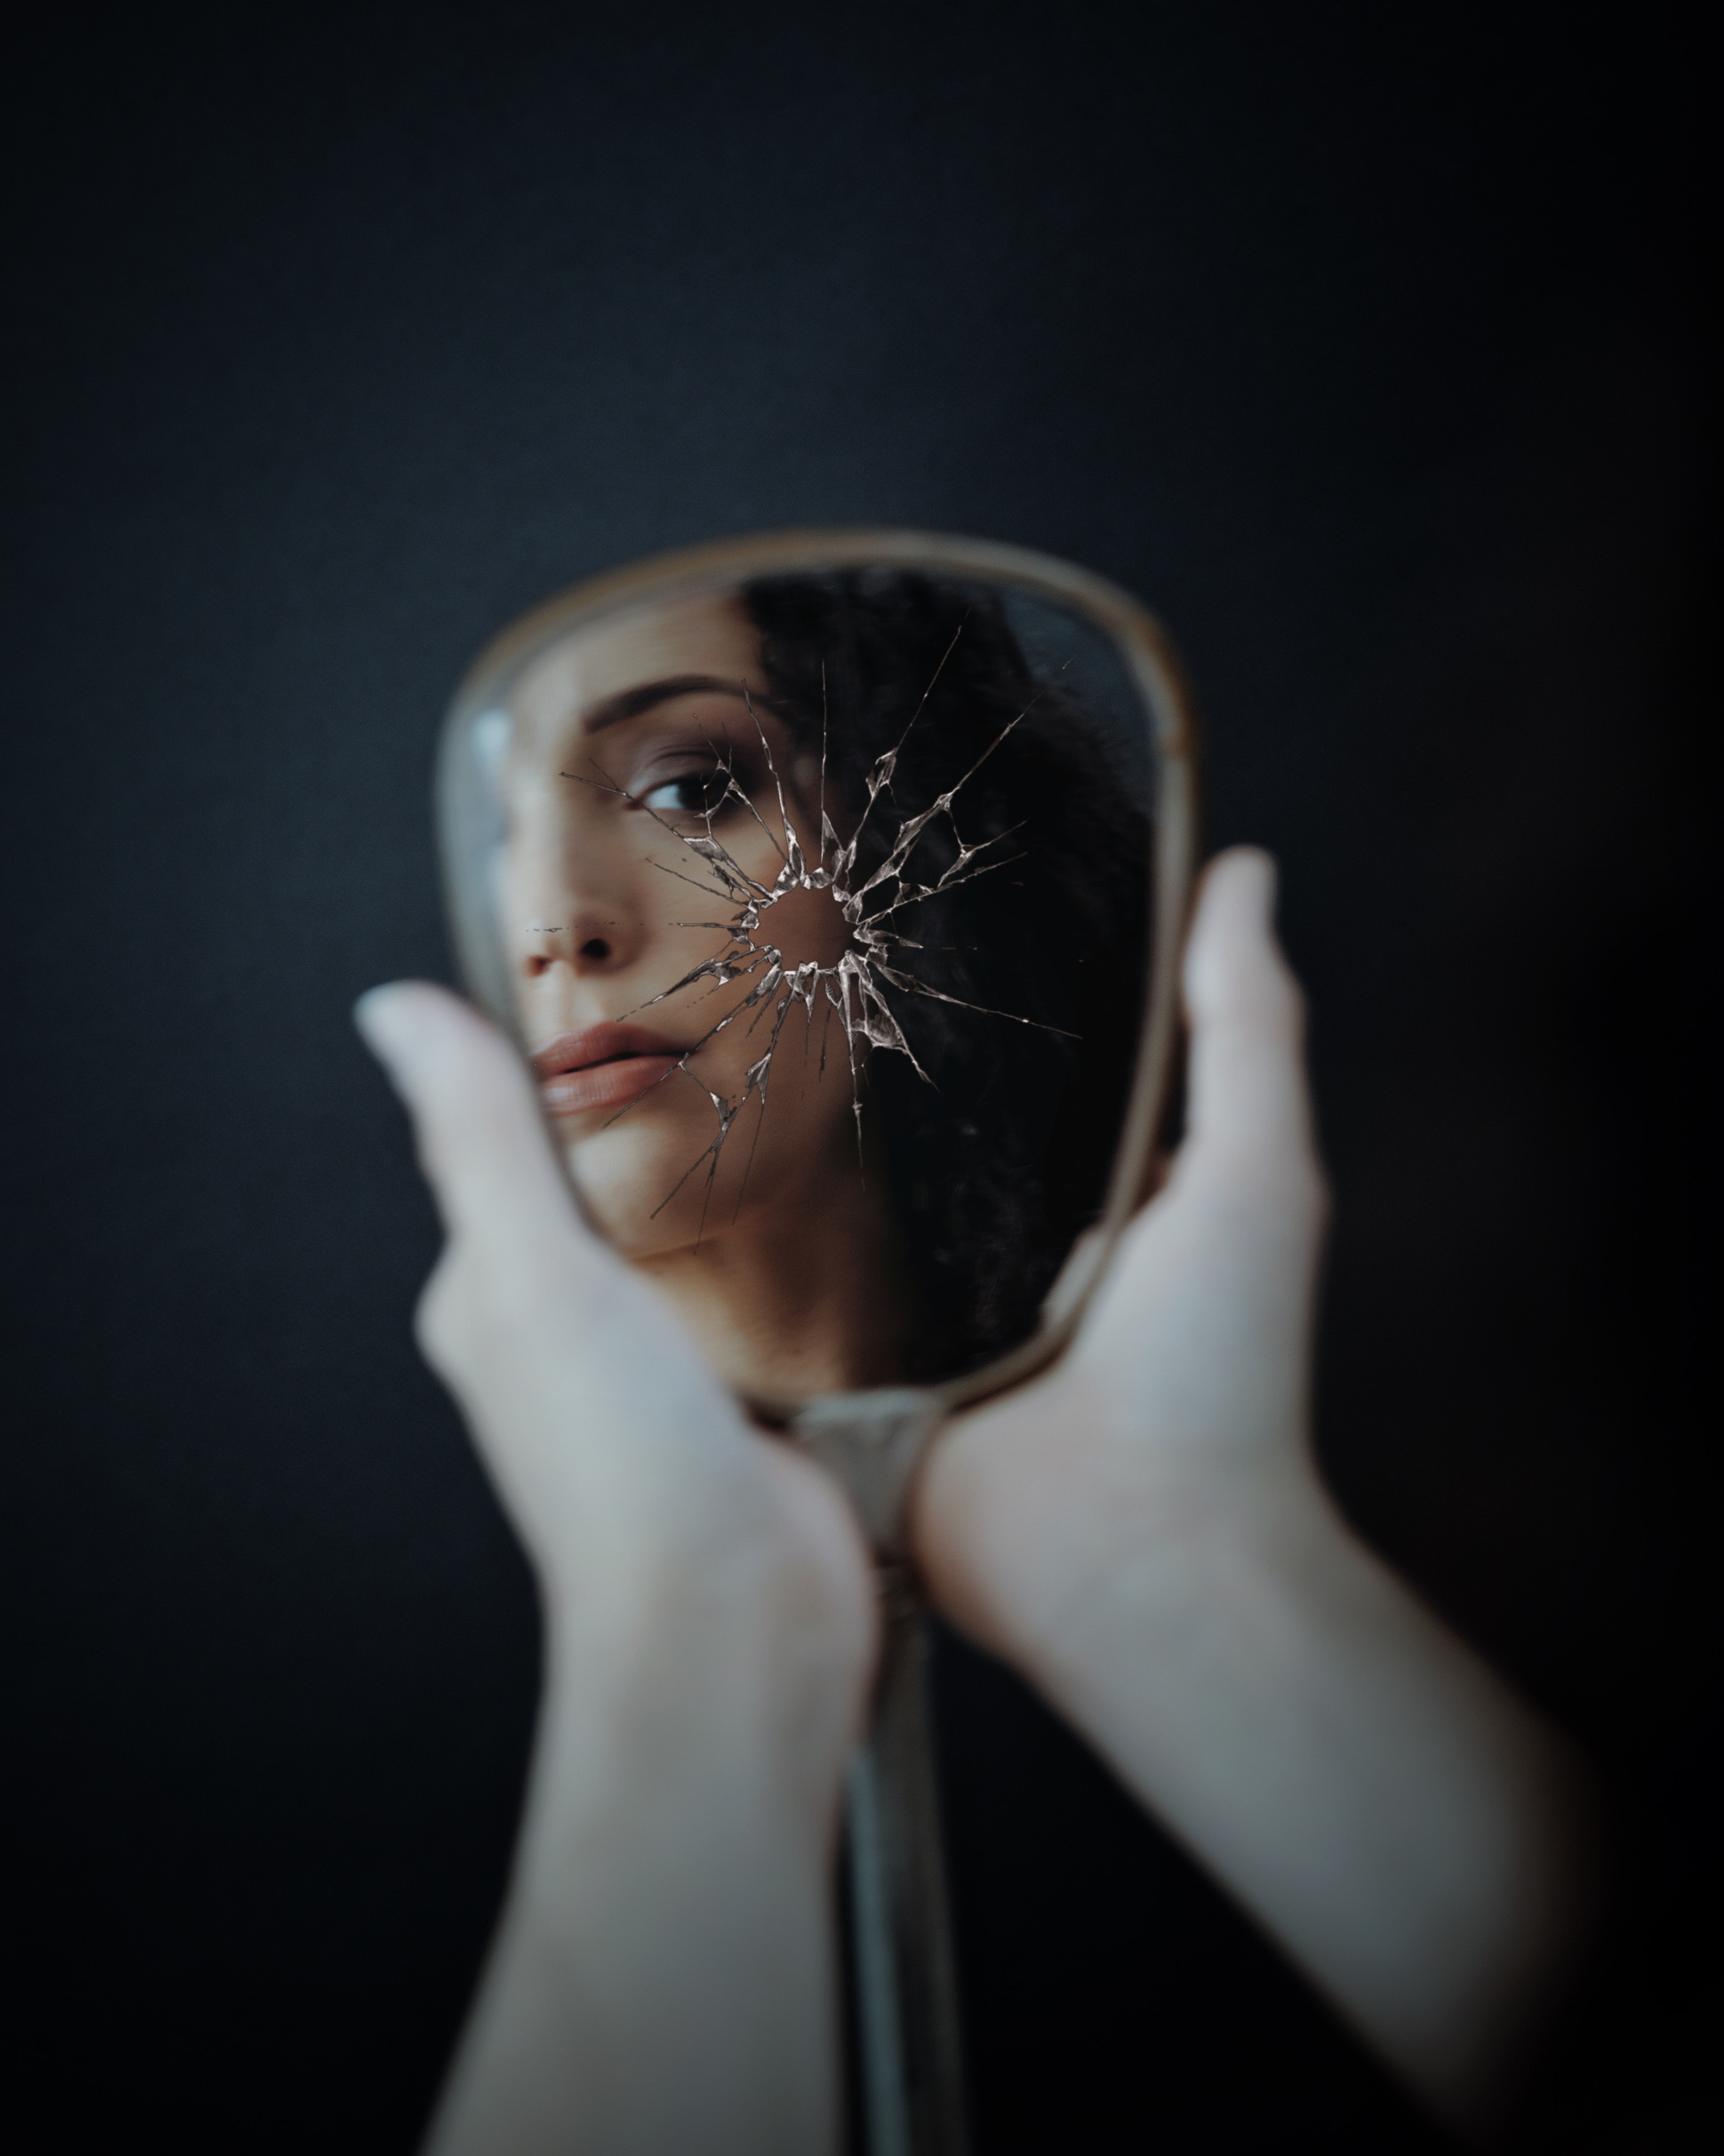 A woman looking at her reflection in a cracked mirror. | Source: Pexels